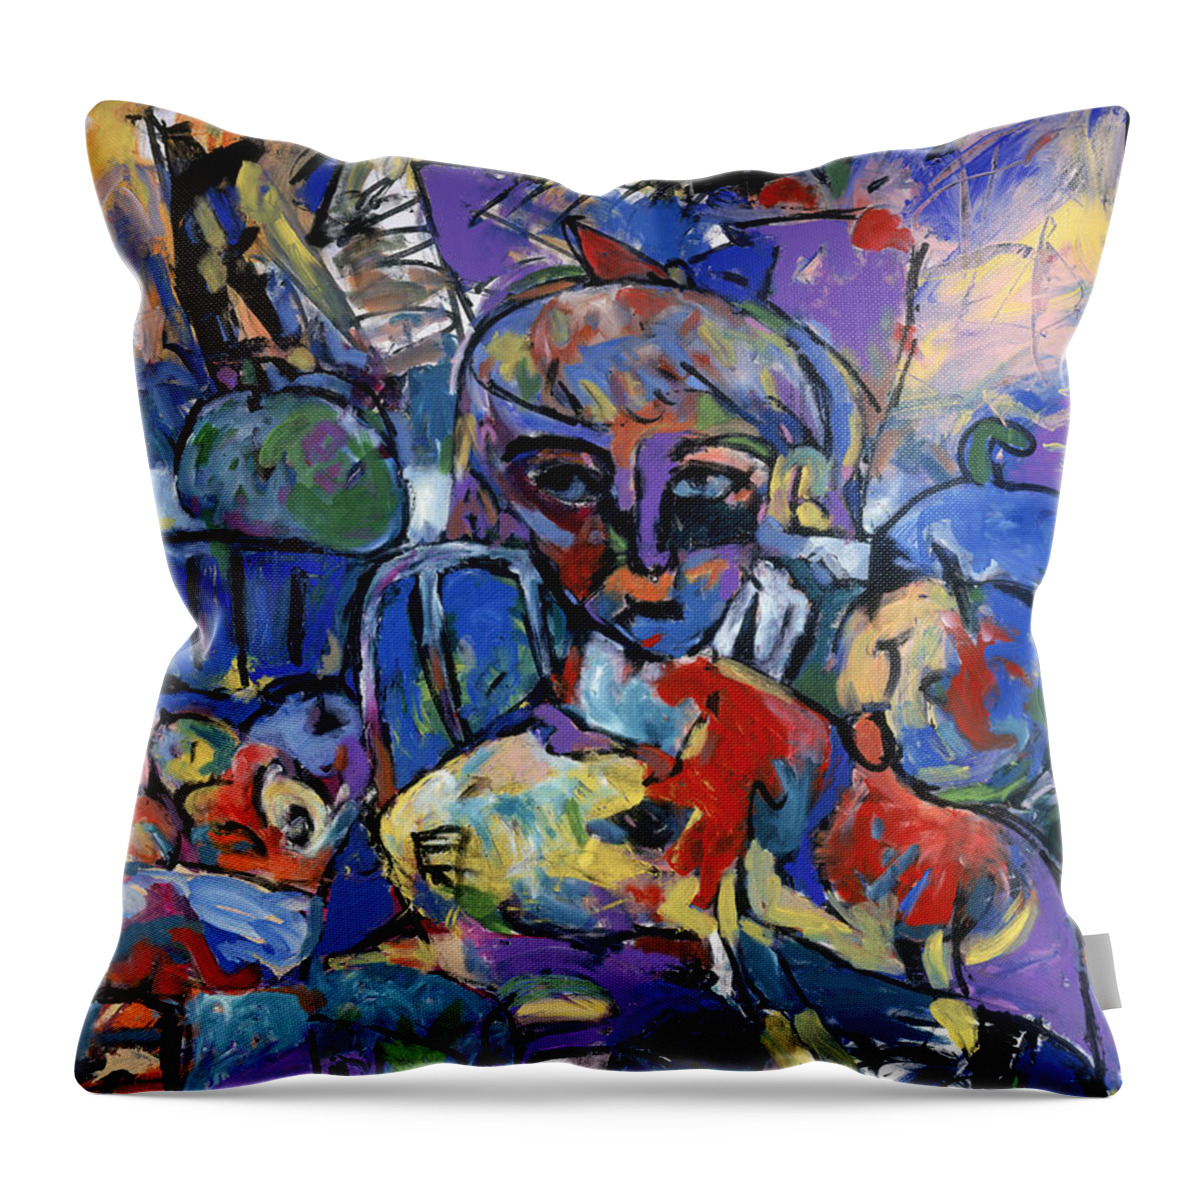 Abstract Throw Pillow featuring the painting School Of Learning by Mykul Anjelo